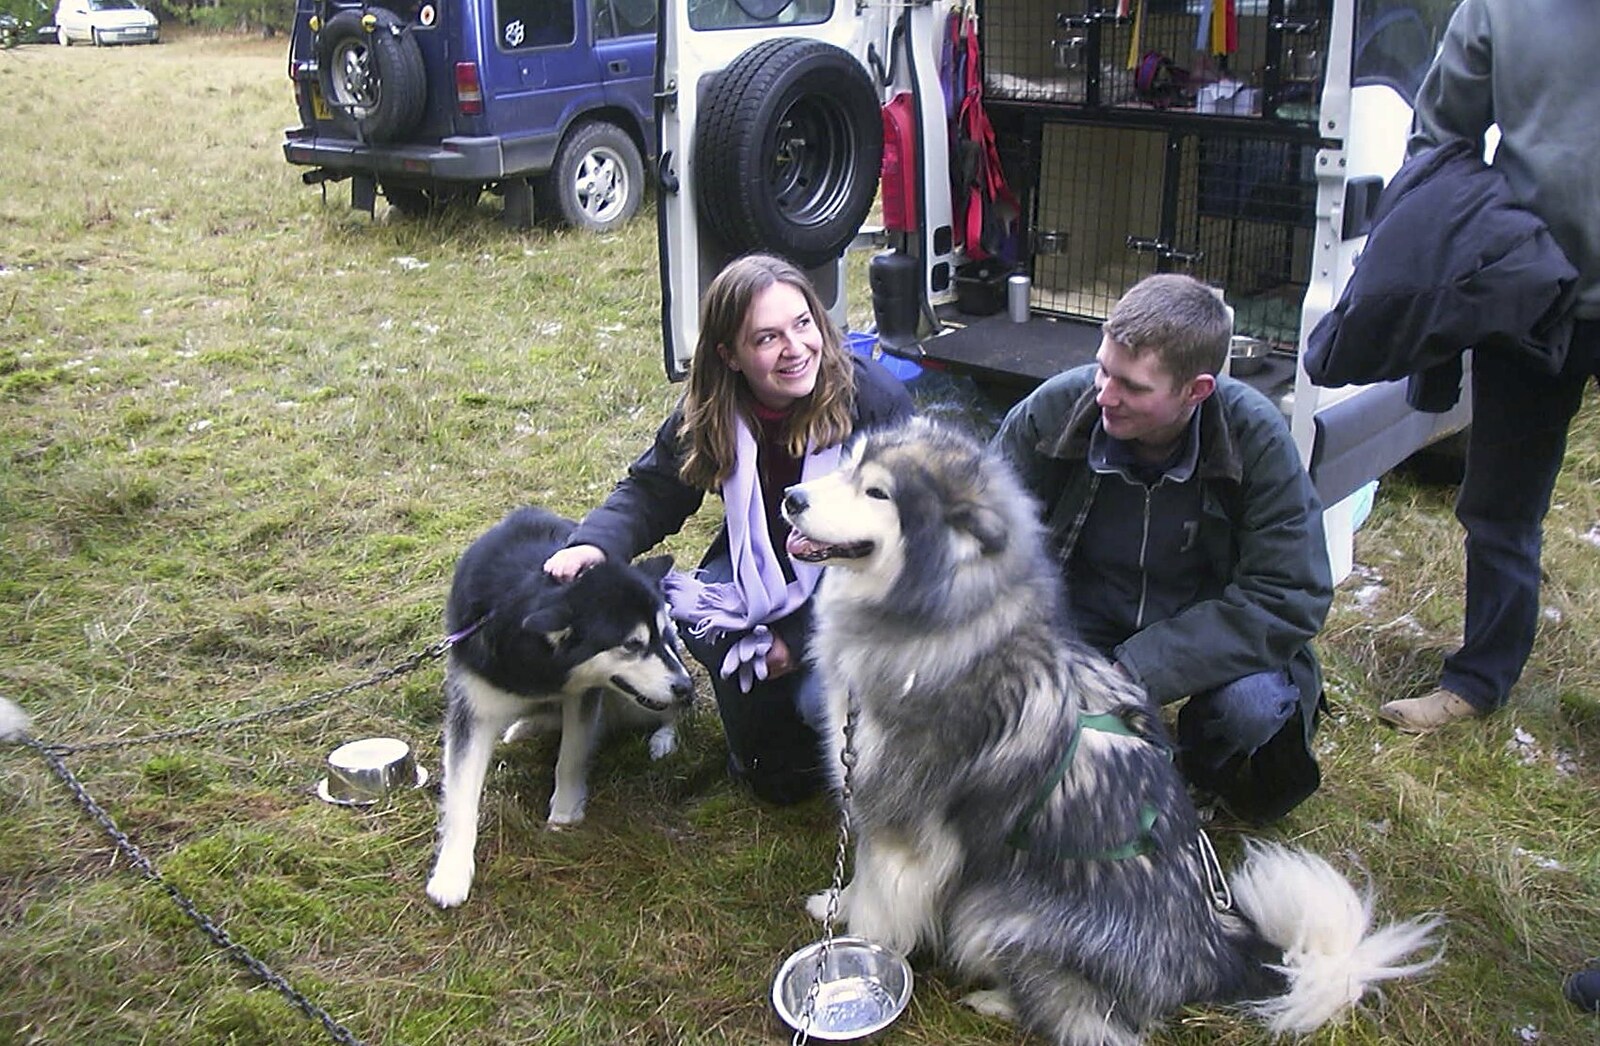 Jess and The Boy Phil with some huskies from A day at the Husky Races, Lakenheath, Suffolk - 29th February 2004